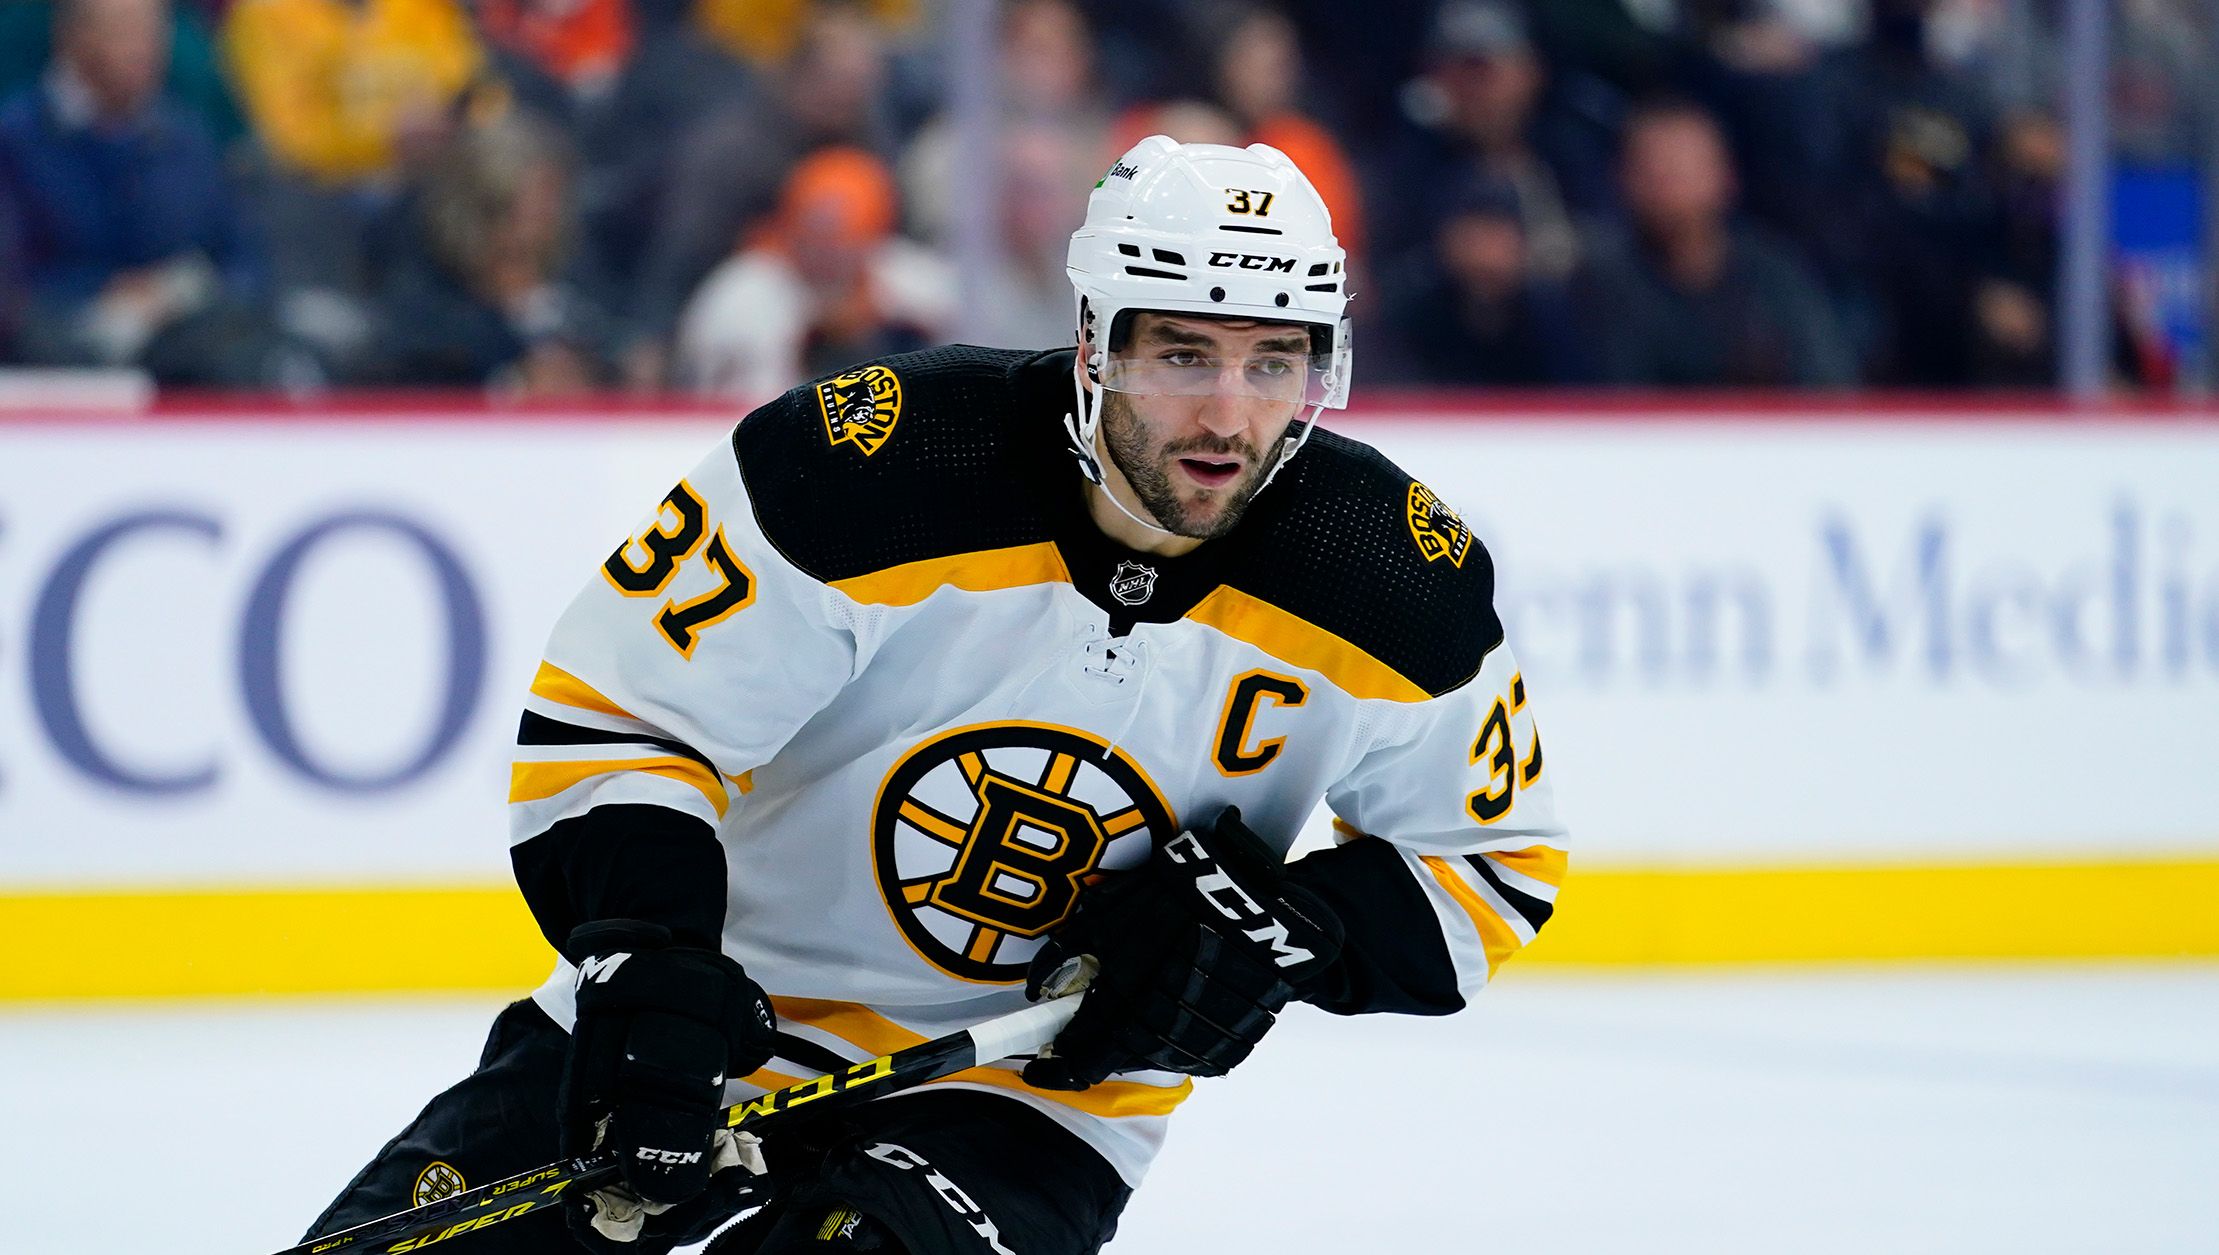 Who is Patrice Bergeron Wife? Know Everything About Patrice